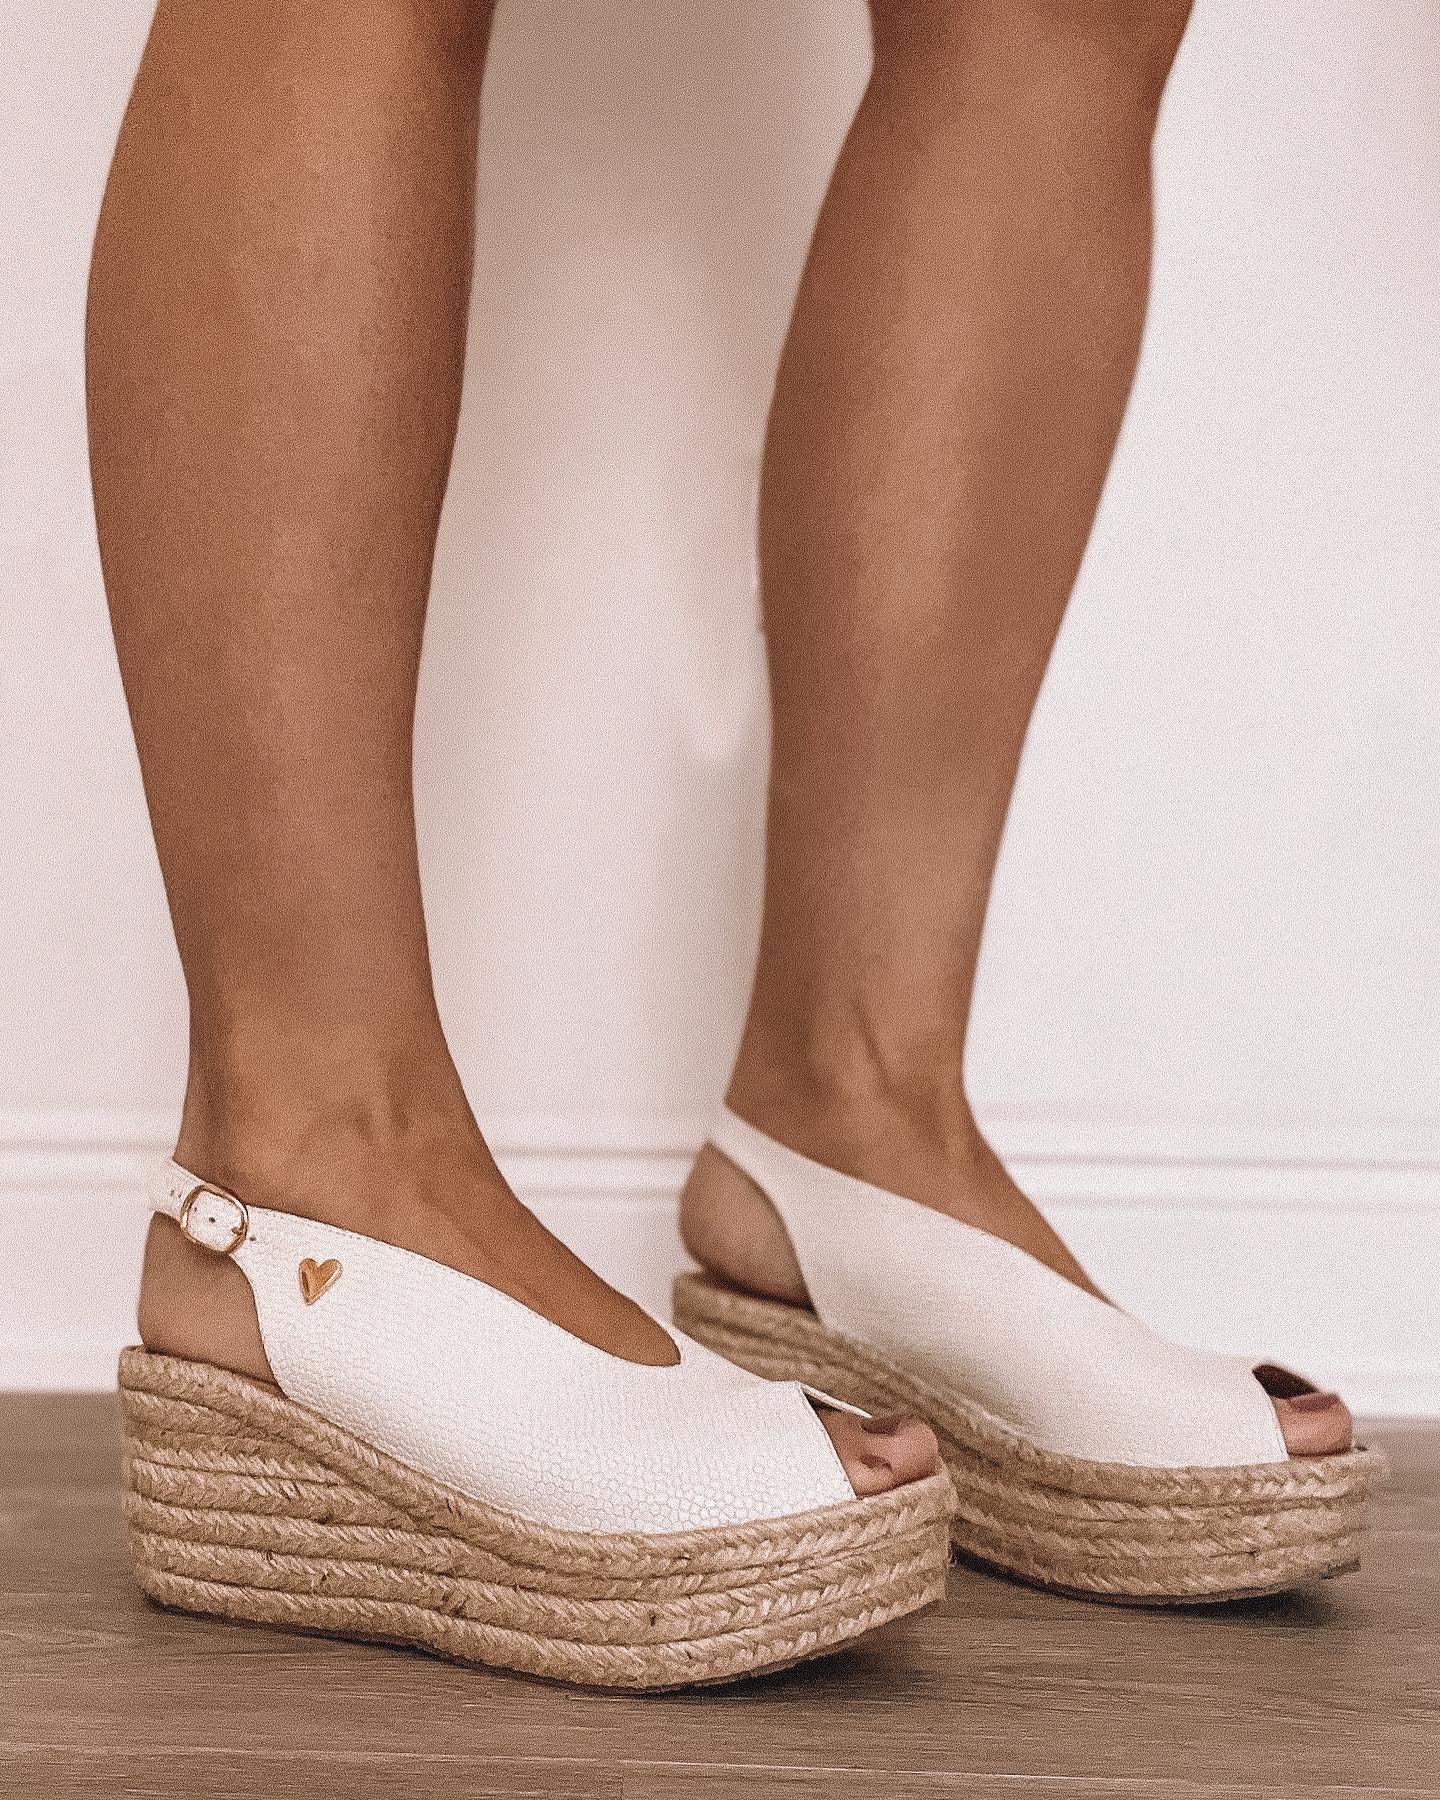 Sandal Tarah Espadrilles by Nataly Mendez. Genuine leather upper material Leather insole lining Flexible rubber sole Handmade 3 inch heel height 1.75 inch platform